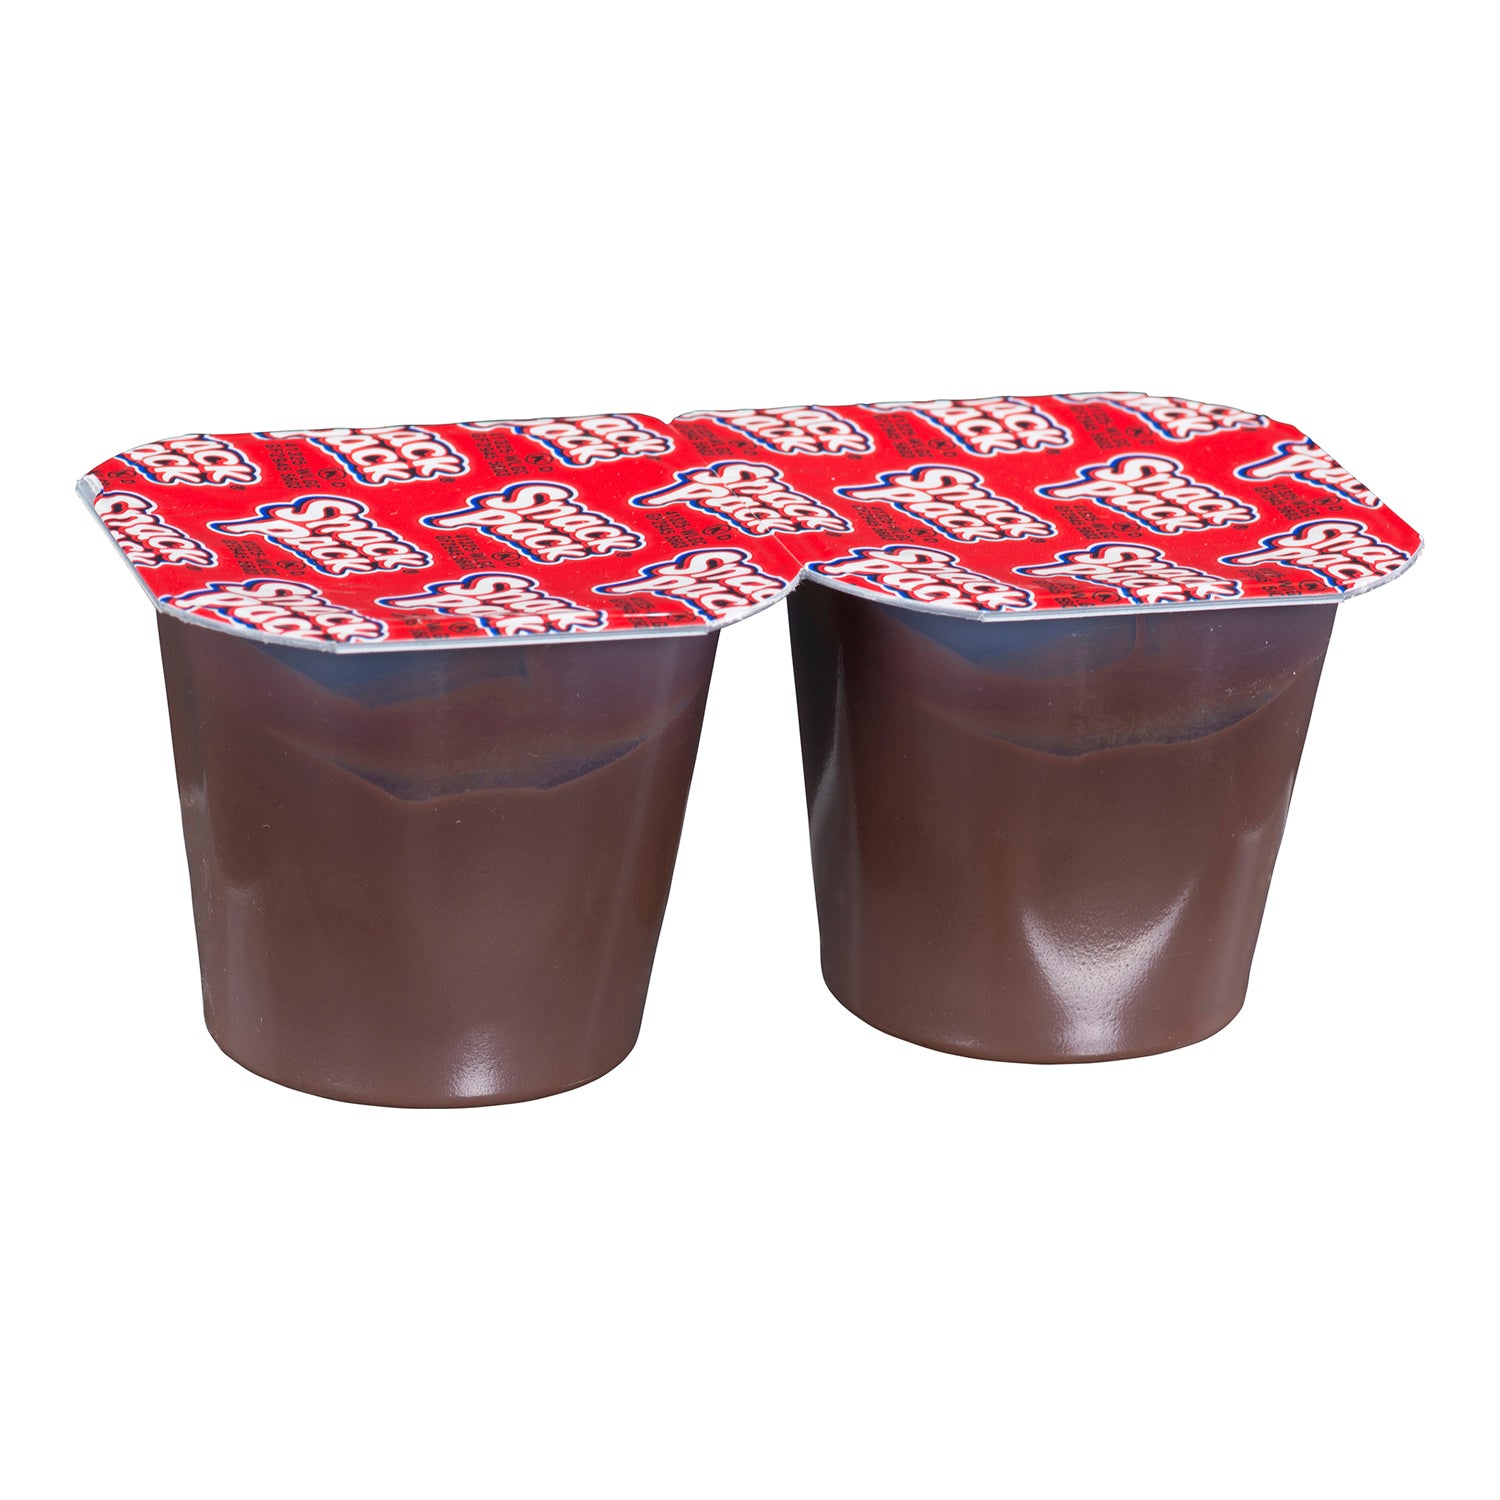 Snack Pack Chocolate Pudding 48x99g [$0.77/ea]